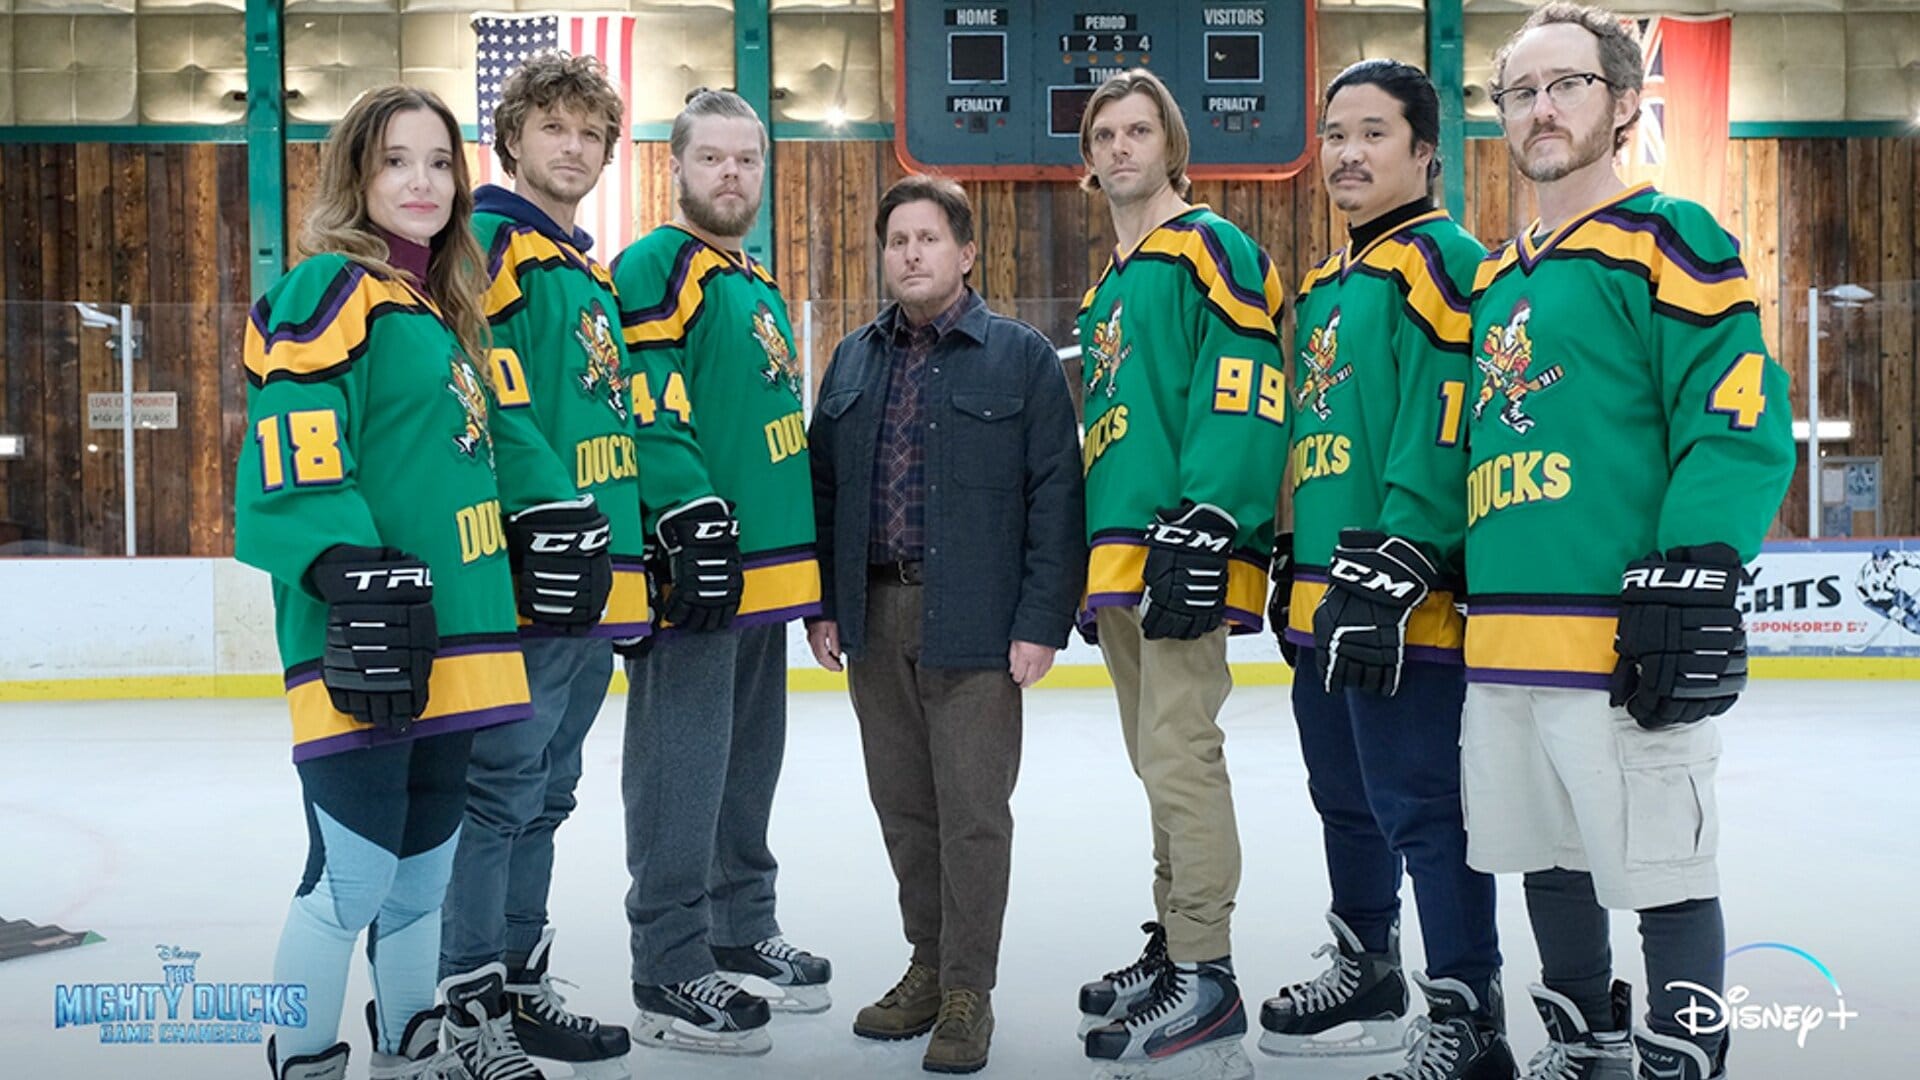 Review The Mighty Ducks: Game Changers Quack Is Back! Hashtag Show